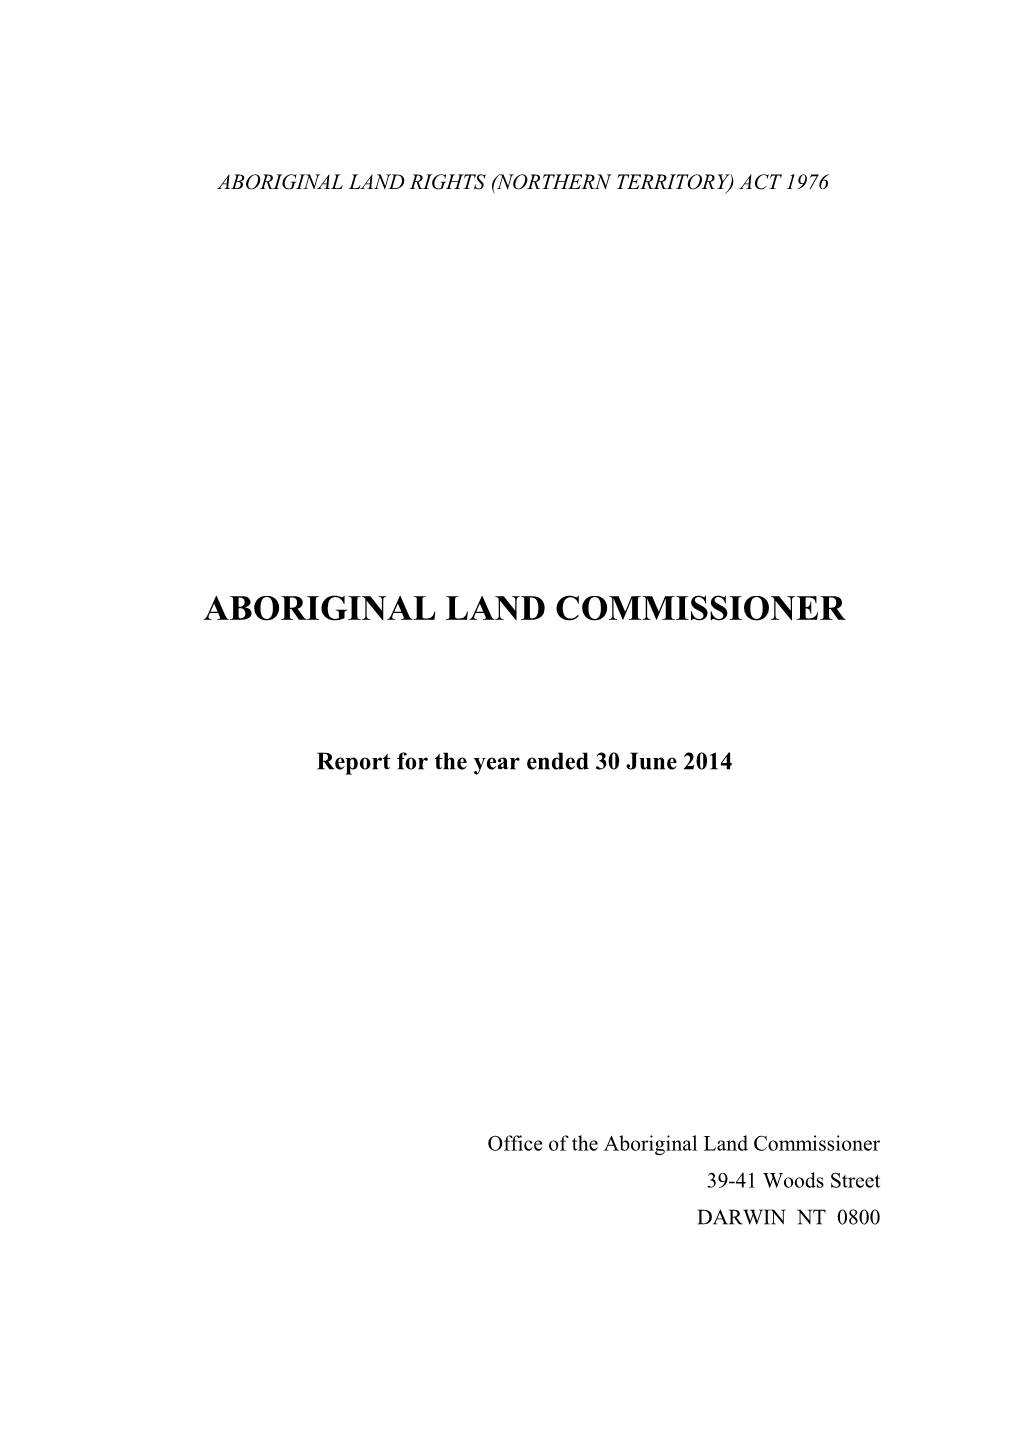 ABORIGINAL LAND Commissionerreport for the Year Ended 30 June 2014